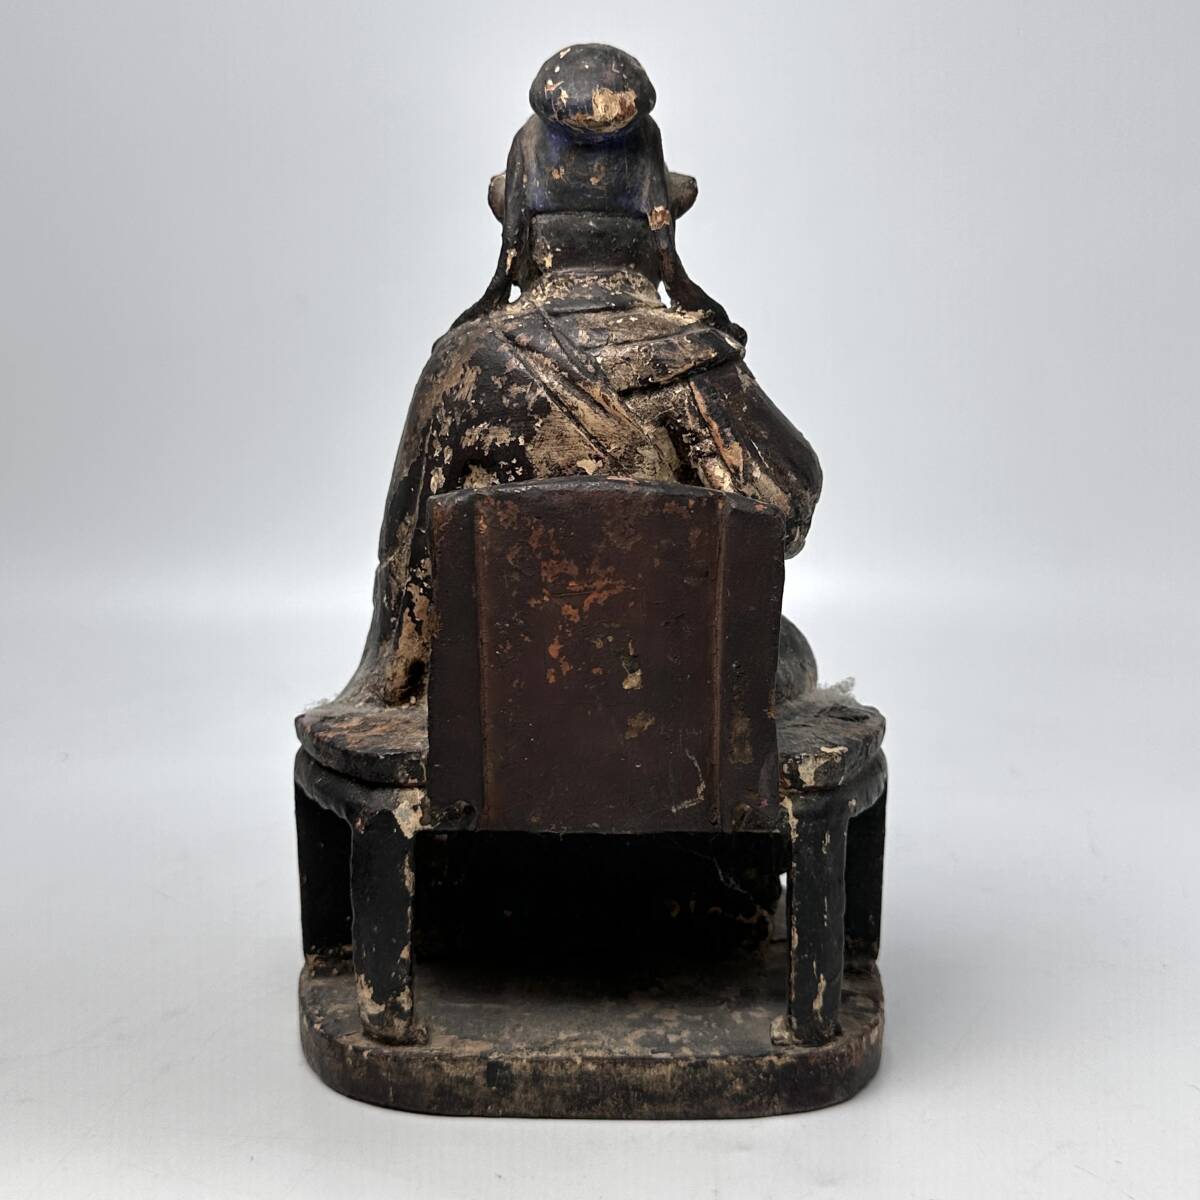  era thing old house adjustment goods tree carving god person . image old thing guarantee small . sculpture ( China fine art stationery antique goods Tang thing .. tree carving Buddhist image Buddhism fine art . tea utensils )